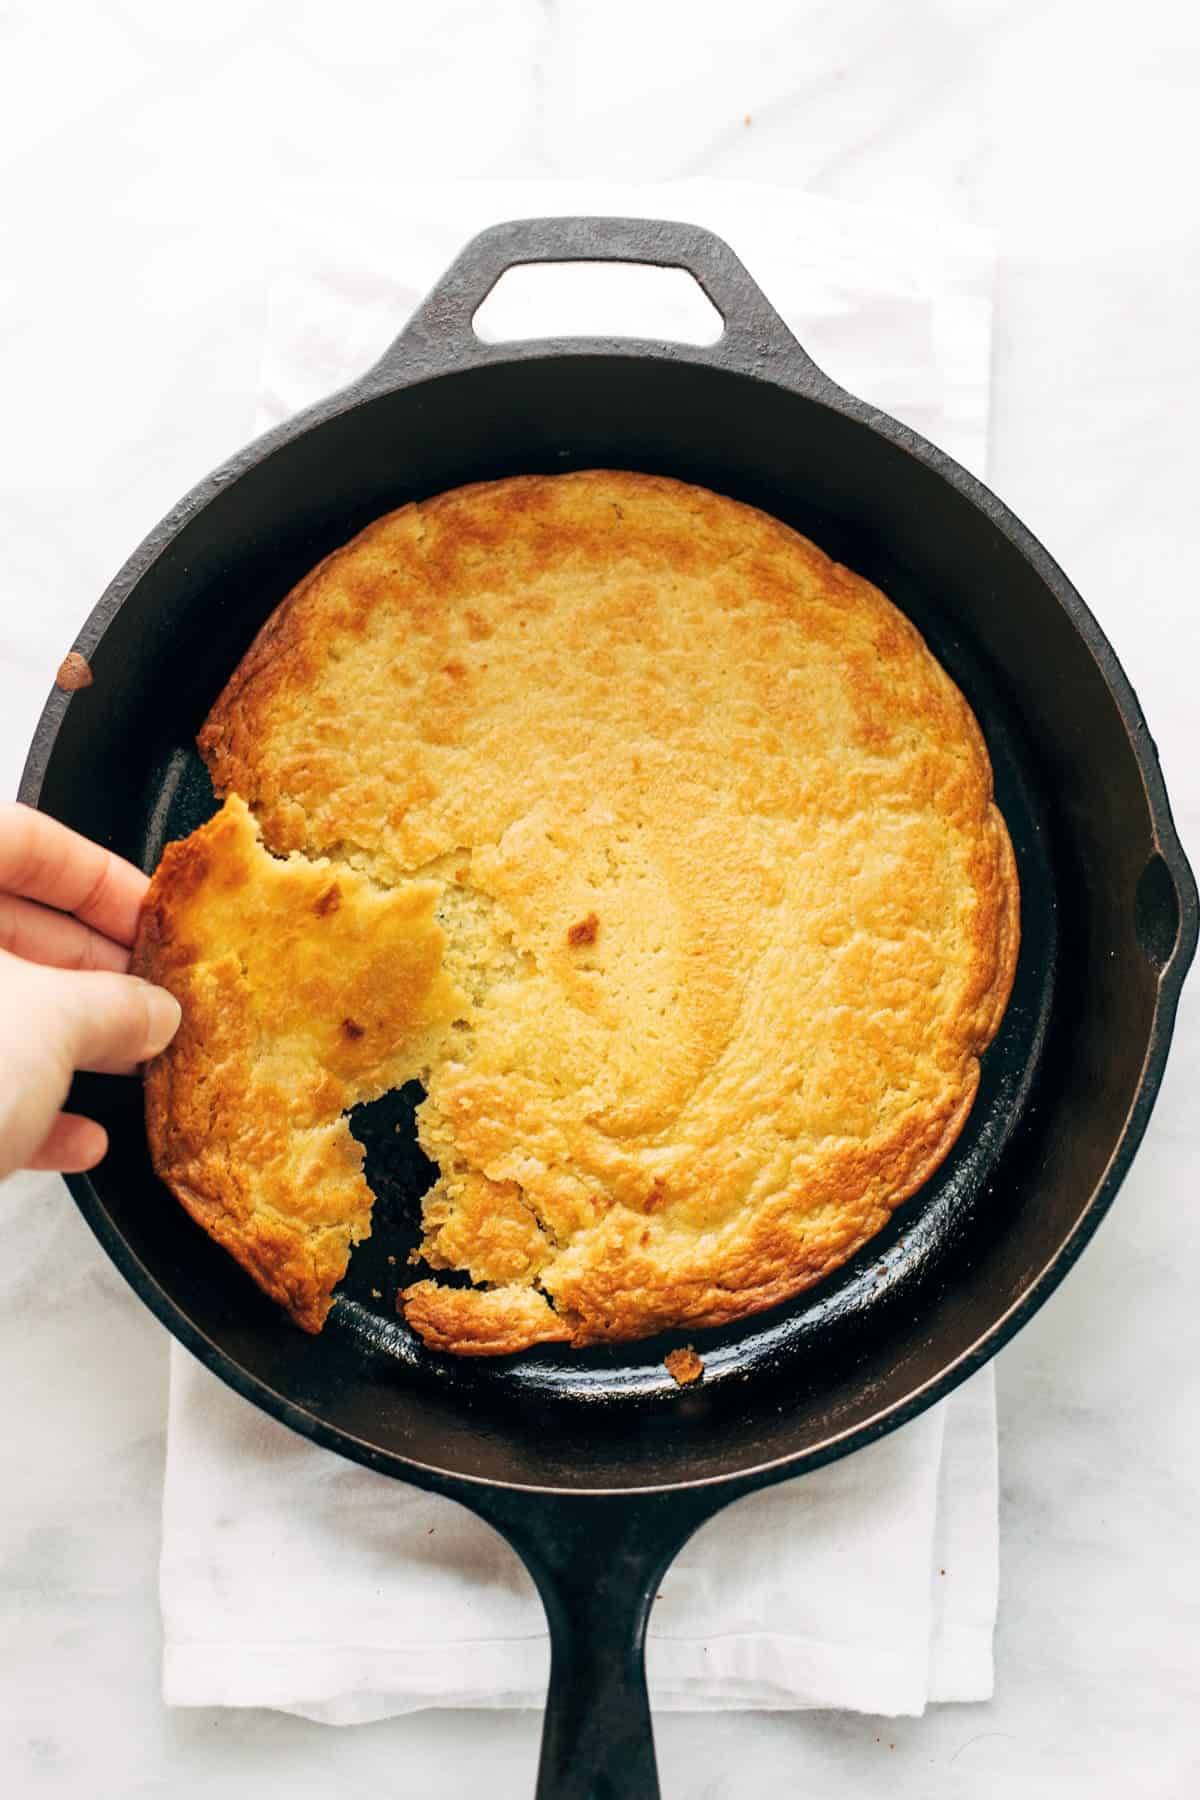 This Is Your Chance to Save on the Best Cast-Iron Skillet